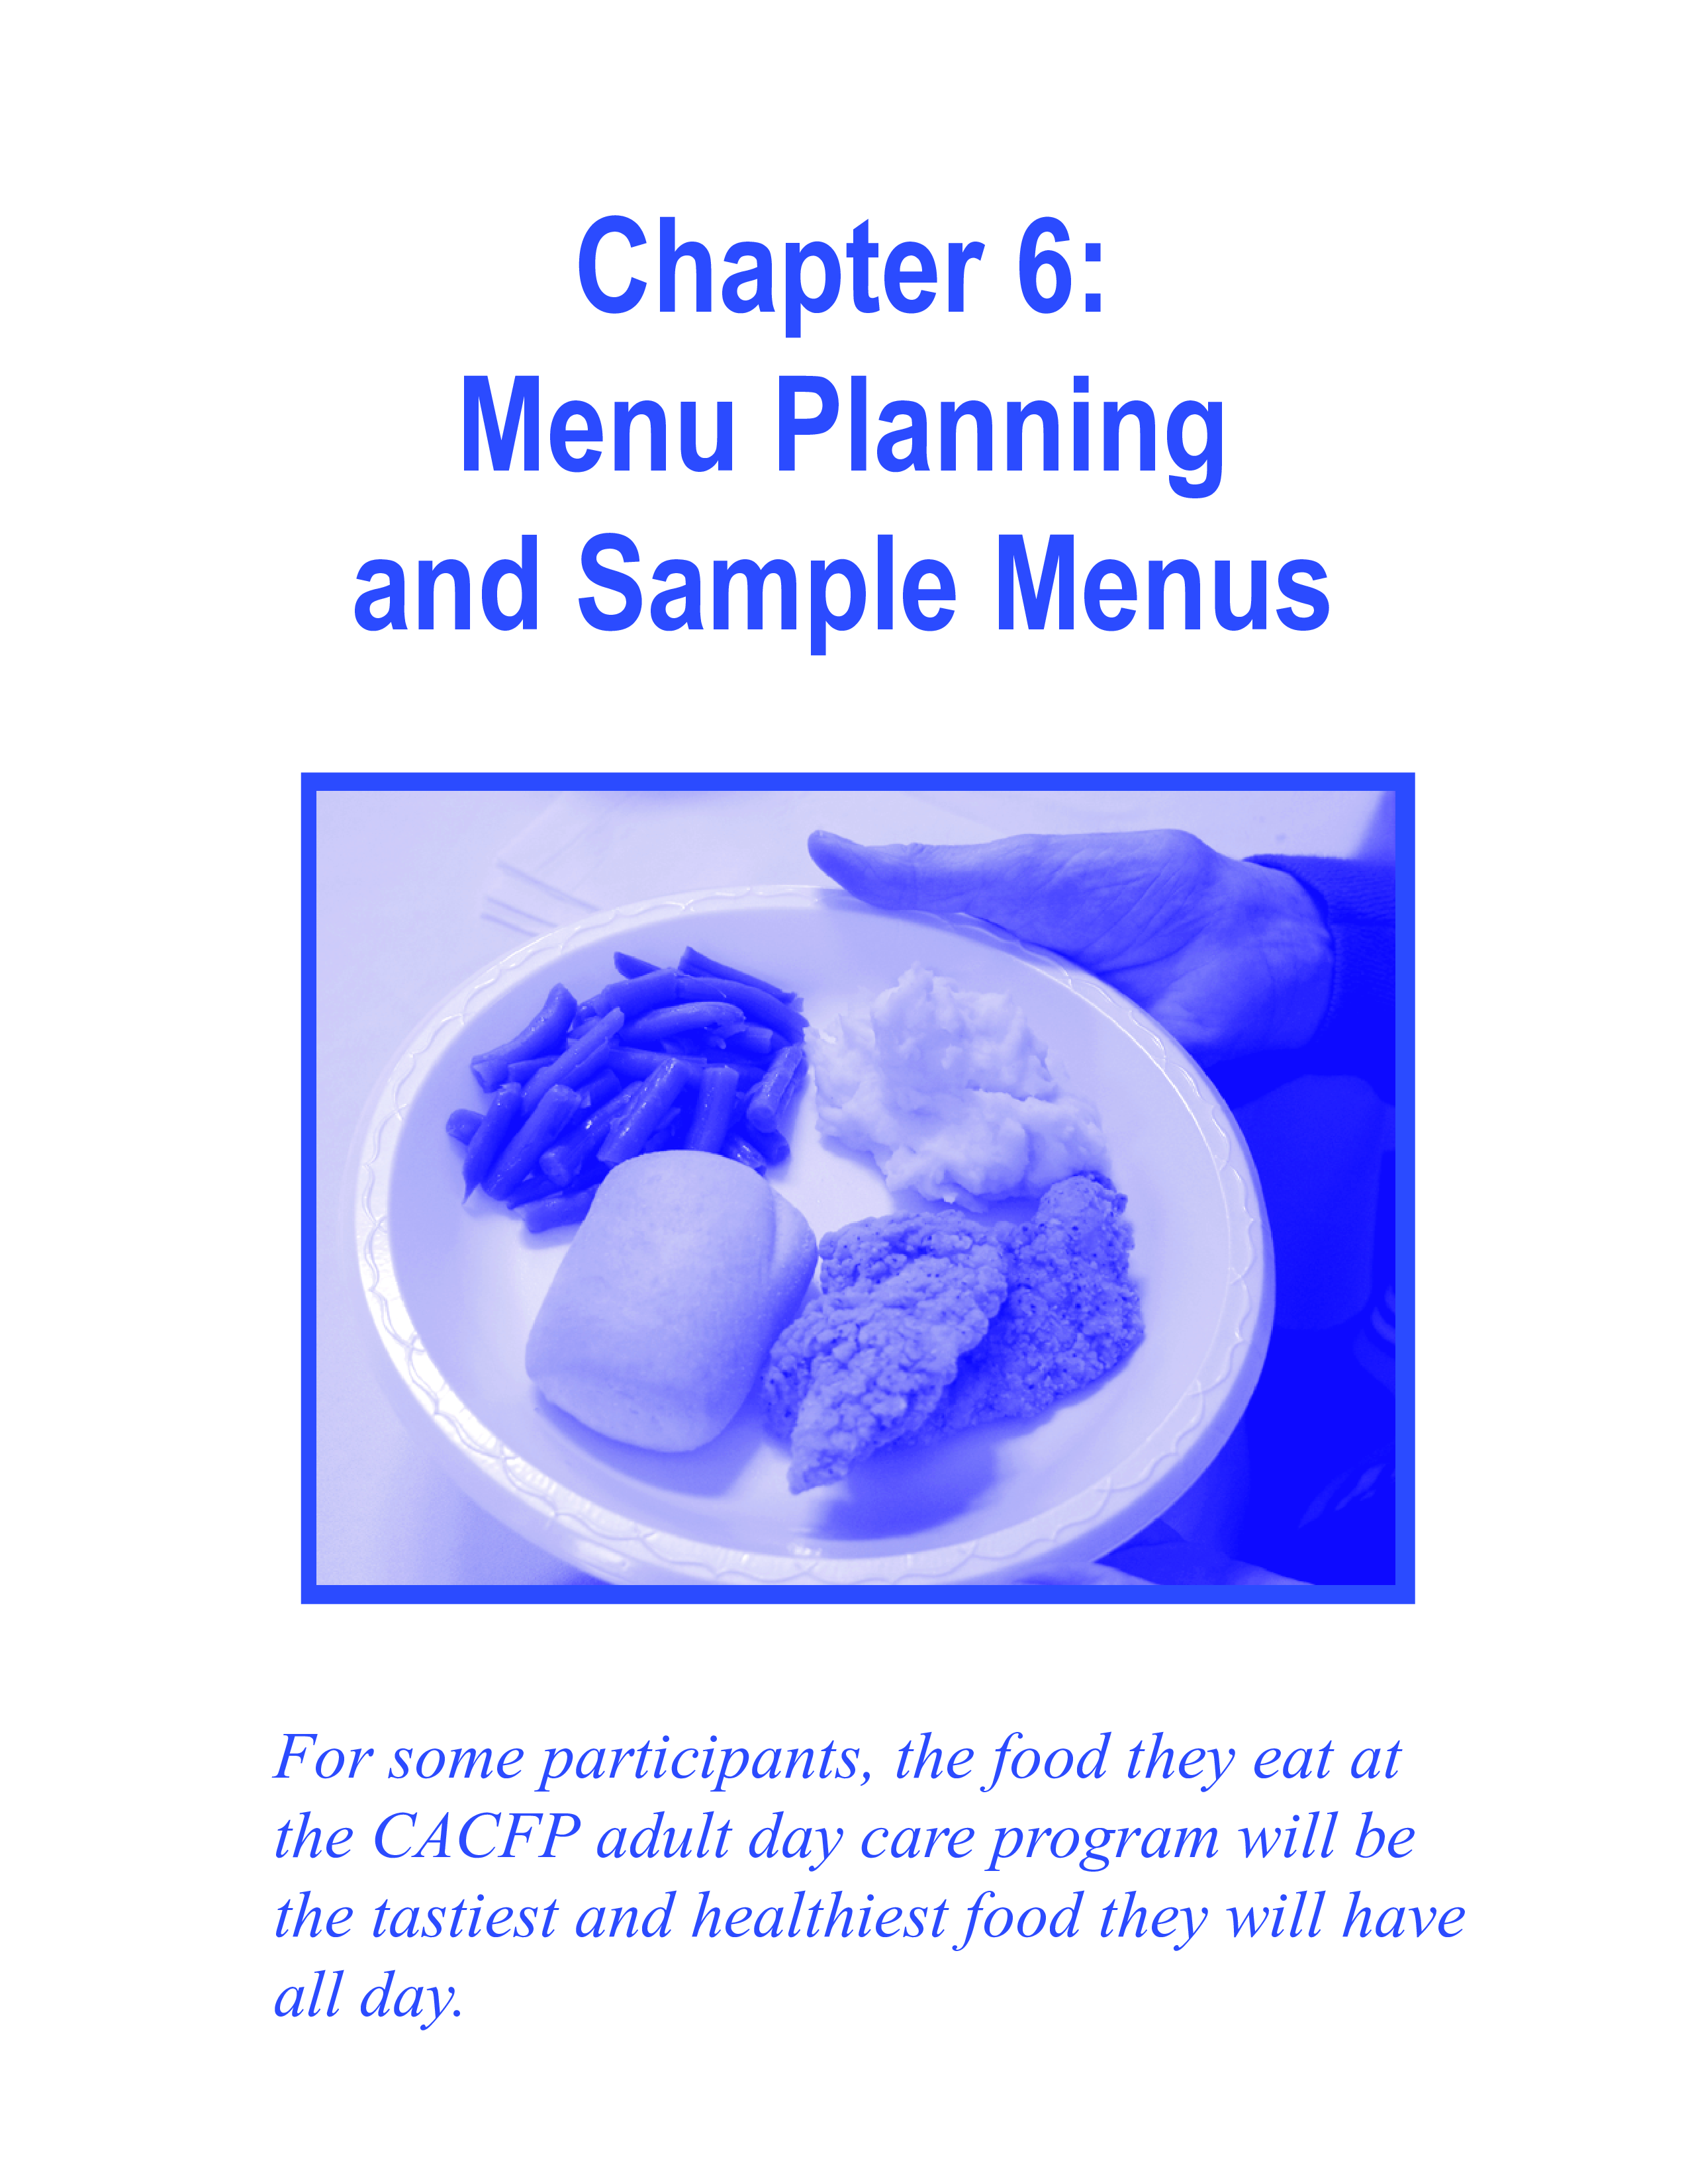 Daycare Meal Plan main image